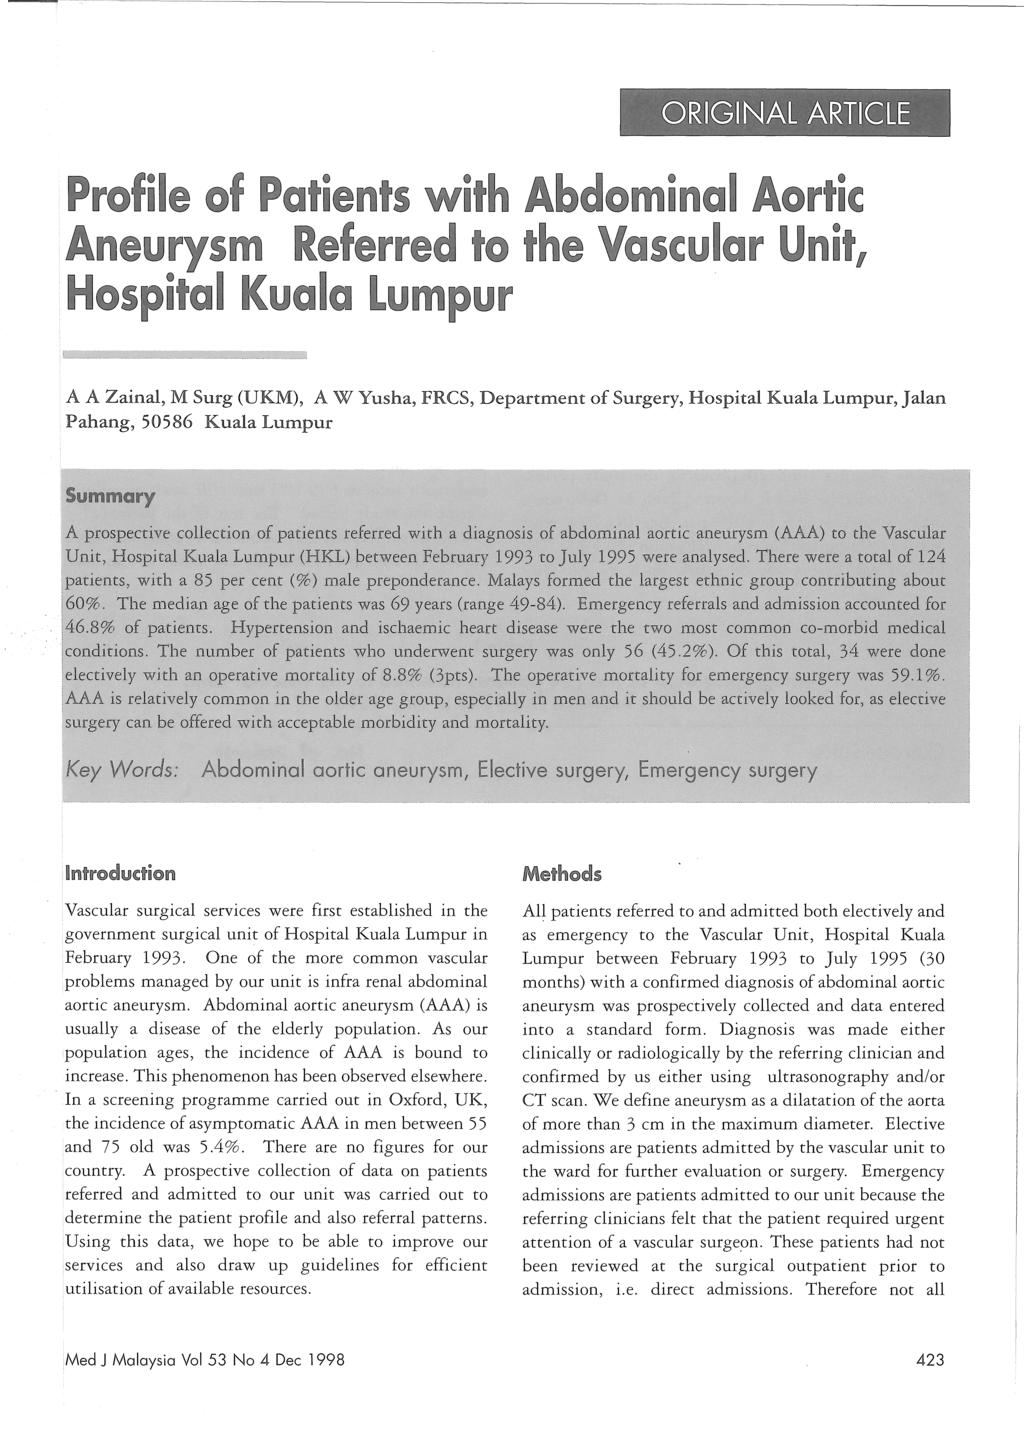 Profile of Patients with Abdominal Aortic Aneurysm Referred to the Vascular Unit, Hospital Kuala Lumpur A A Zainal, M Surg (UKM), A W Yusha, FRCS, Department of Surgery, Hospital Kuala Lumpur, J alan